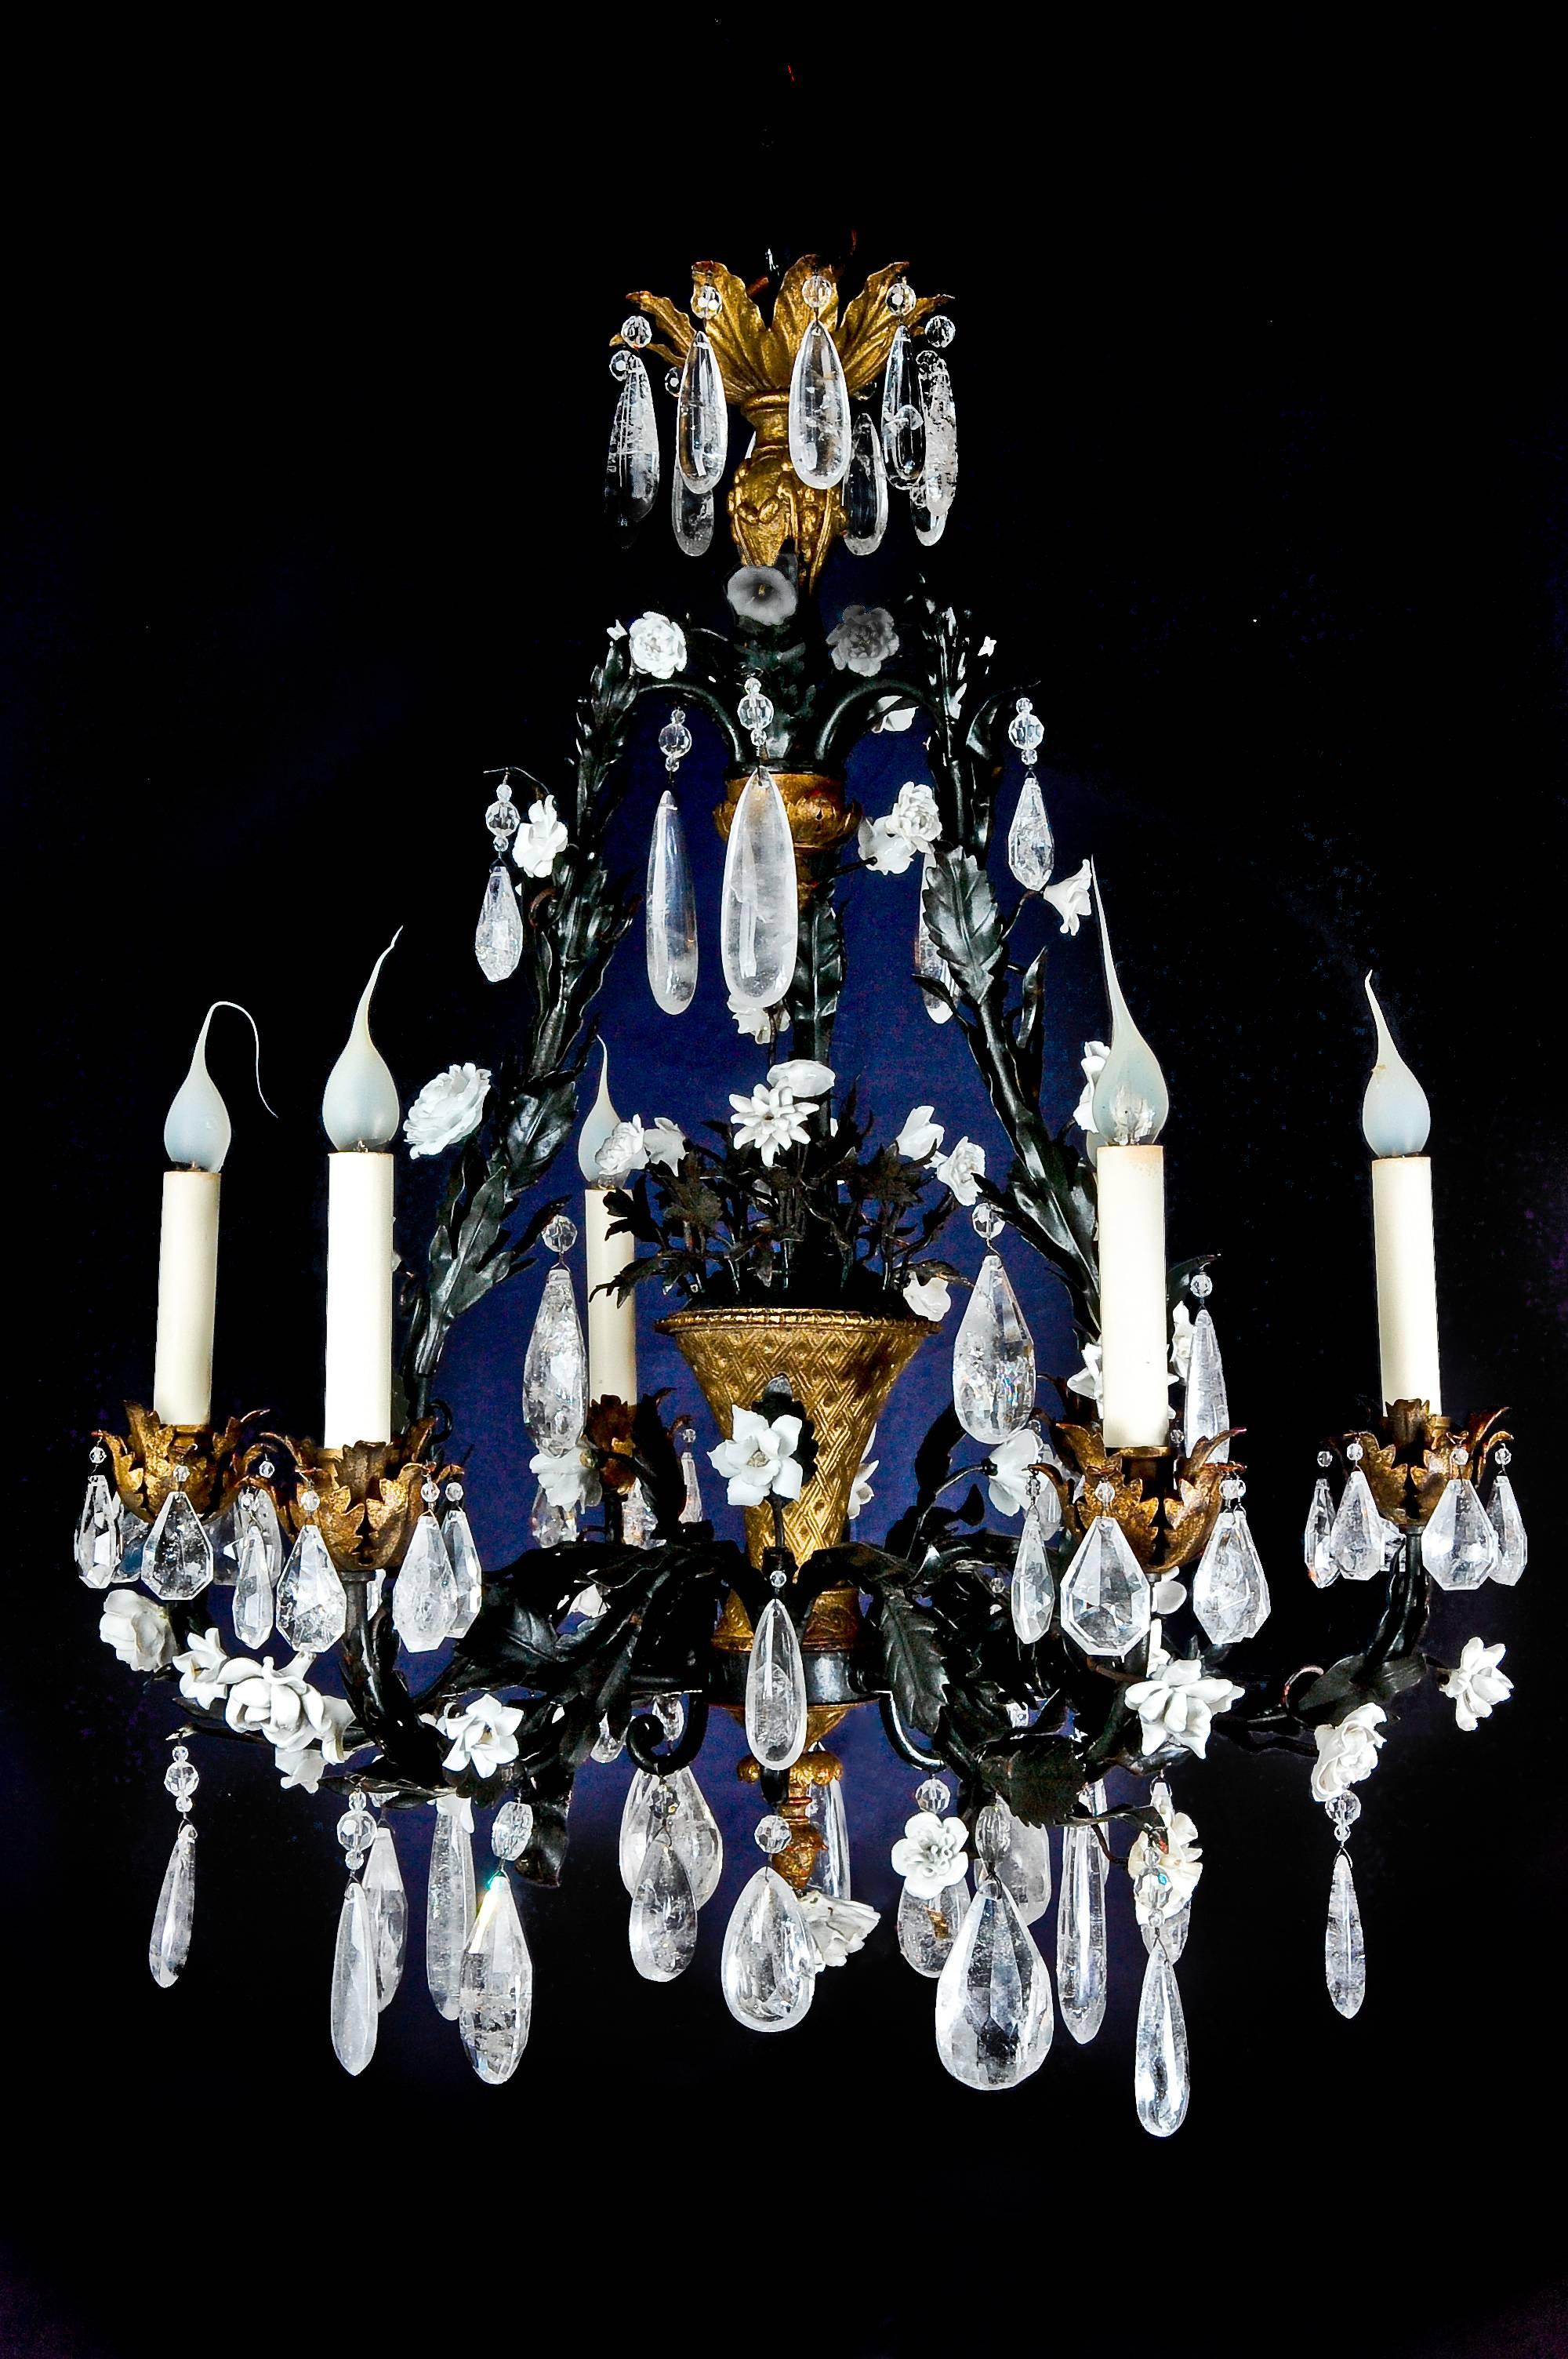 A superb antique French Louis XVI style gilt bronze, tole, rock crystal and porcelain floral chandelier embellished with cut rock crystal prisms, tole leaves and porcelain flowers.